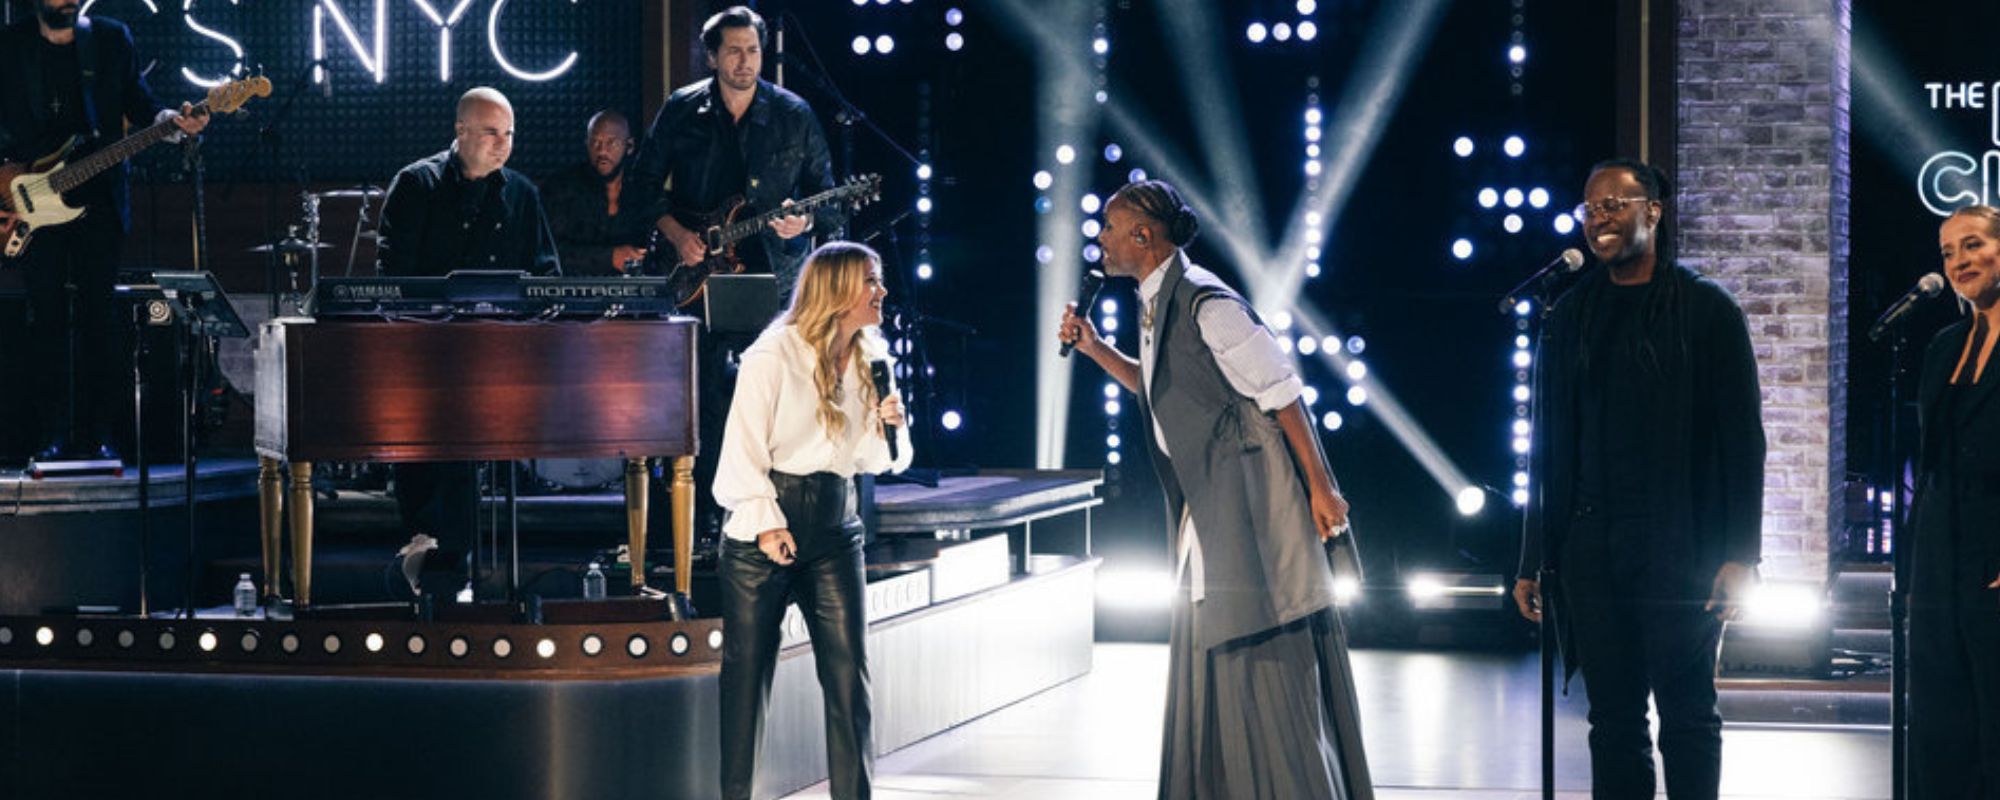 Watch: Kelly Clarkson Duet “Stronger” with Billy Porter on ‘The Kelly Clarkson Show’